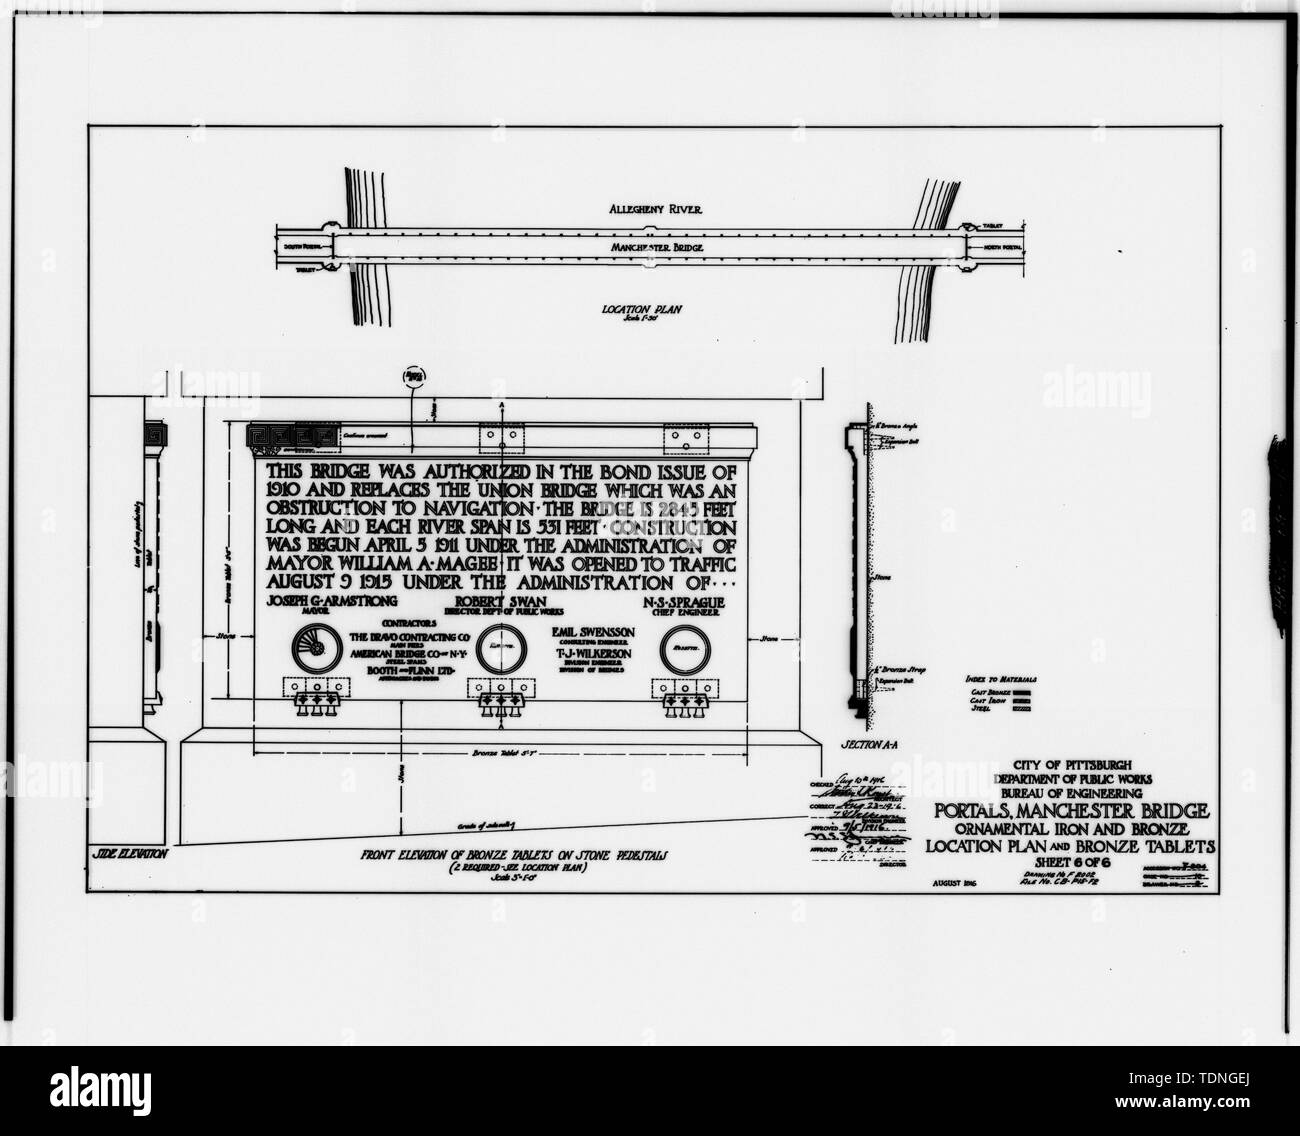 Photocopy of original drawing belonging to the Pittsburgh Department of Public Works, (n.d.). DRAWING NO. 2002- ORNAMENTAL IRON and BRONZE, LOCATION PLAN AND BRONZE TABLETS. - North Side Point Bridge, Spanning Allegheny River at Point of Pittsburgh, Pittsburgh, Allegheny County, PA Stock Photo